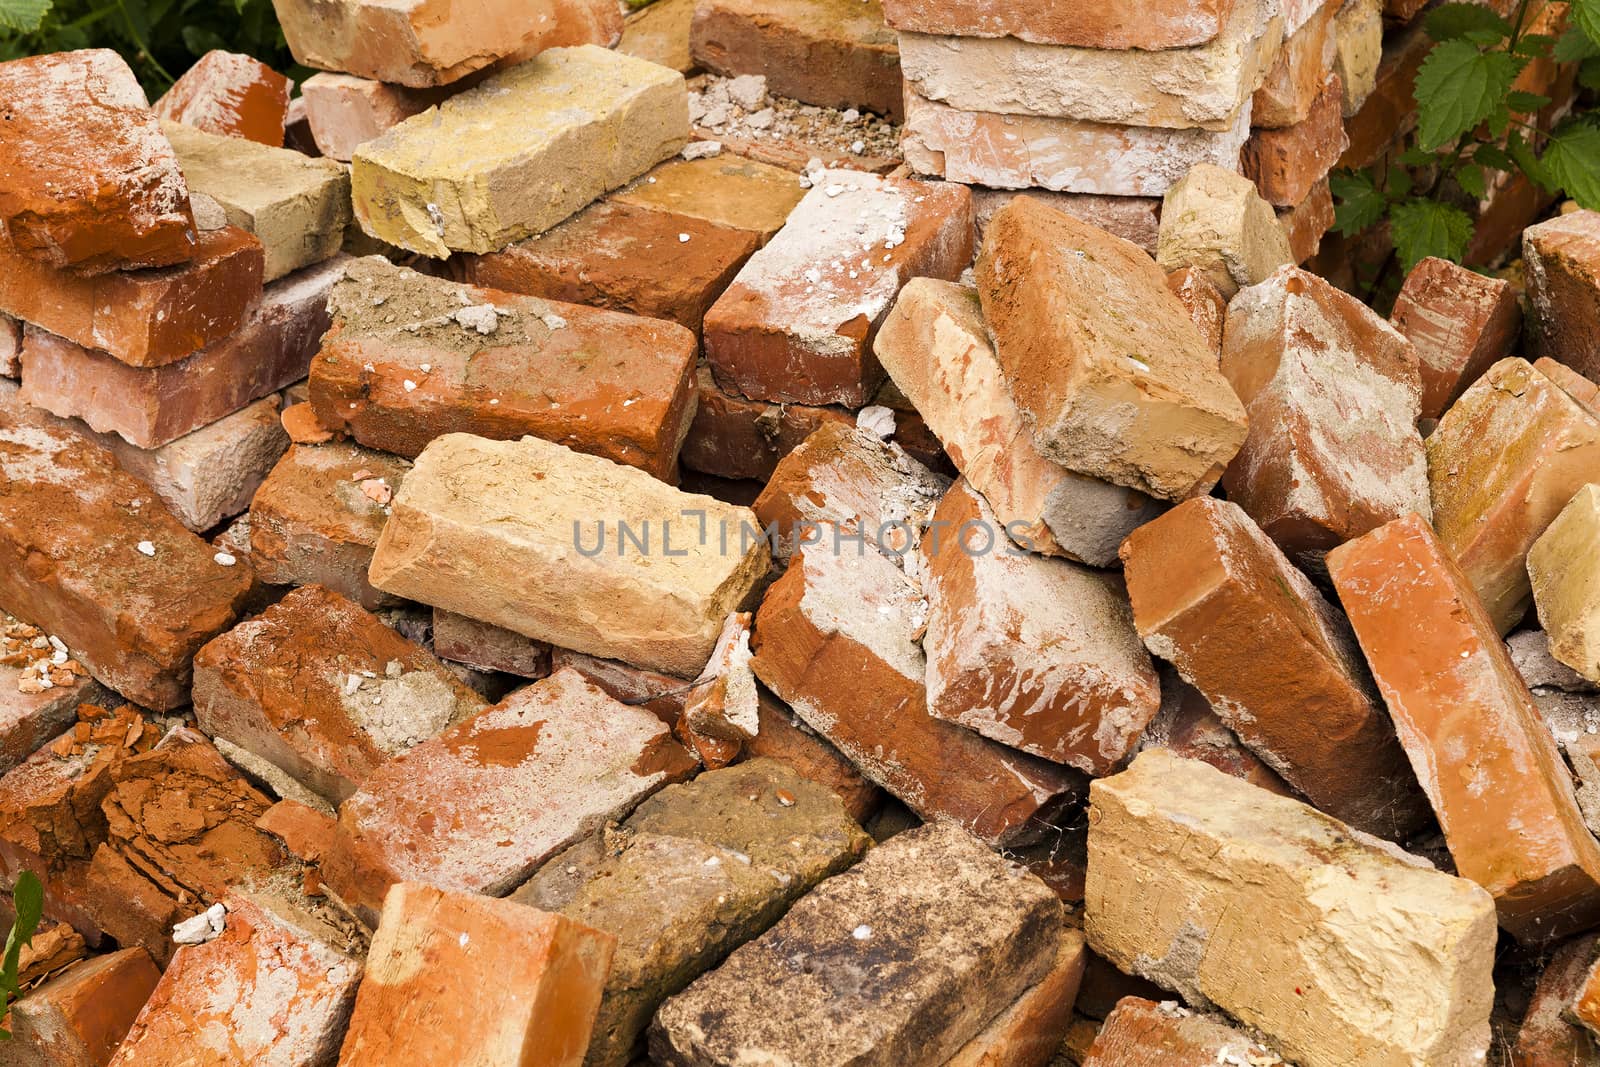 - the old bricks which remained after destruction of the ancient building. the used bricks